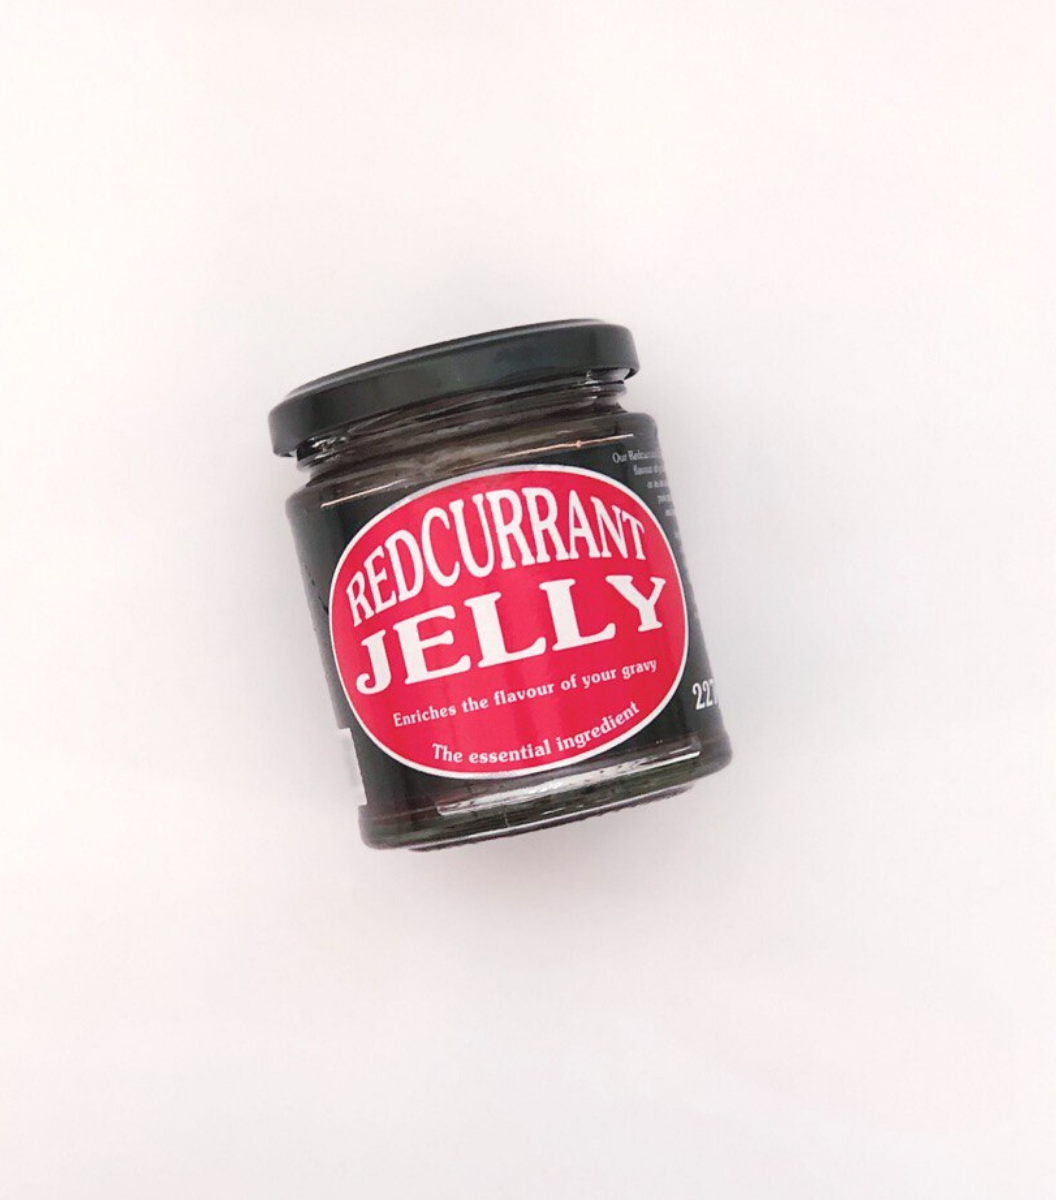 A jar of Welsh redcurrant jelly - 227g